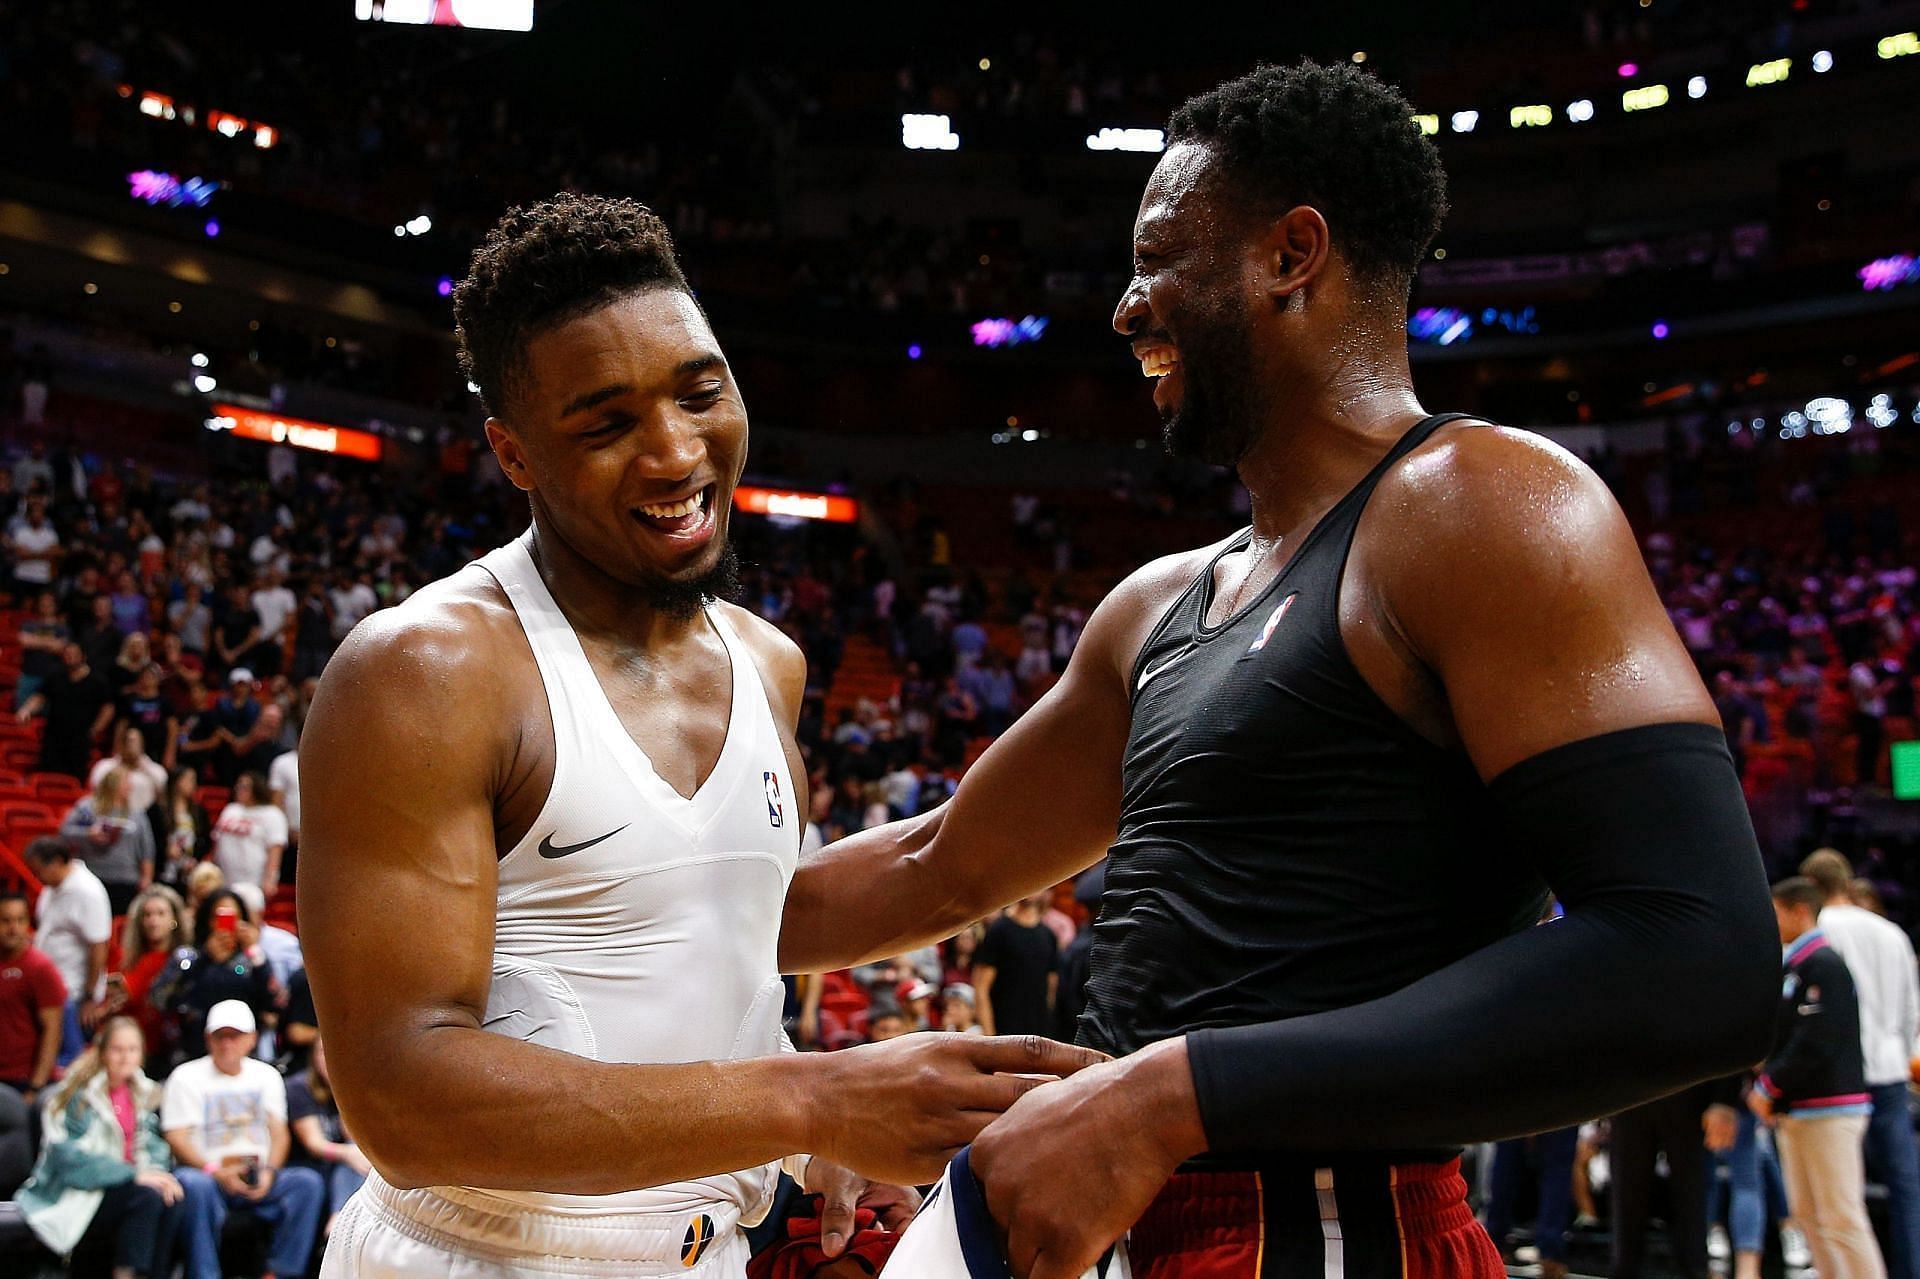 Donovan Mitchell, left, and Dwyane Wade, right. Wade is often regarded as the greatest player for the Miami Heat.